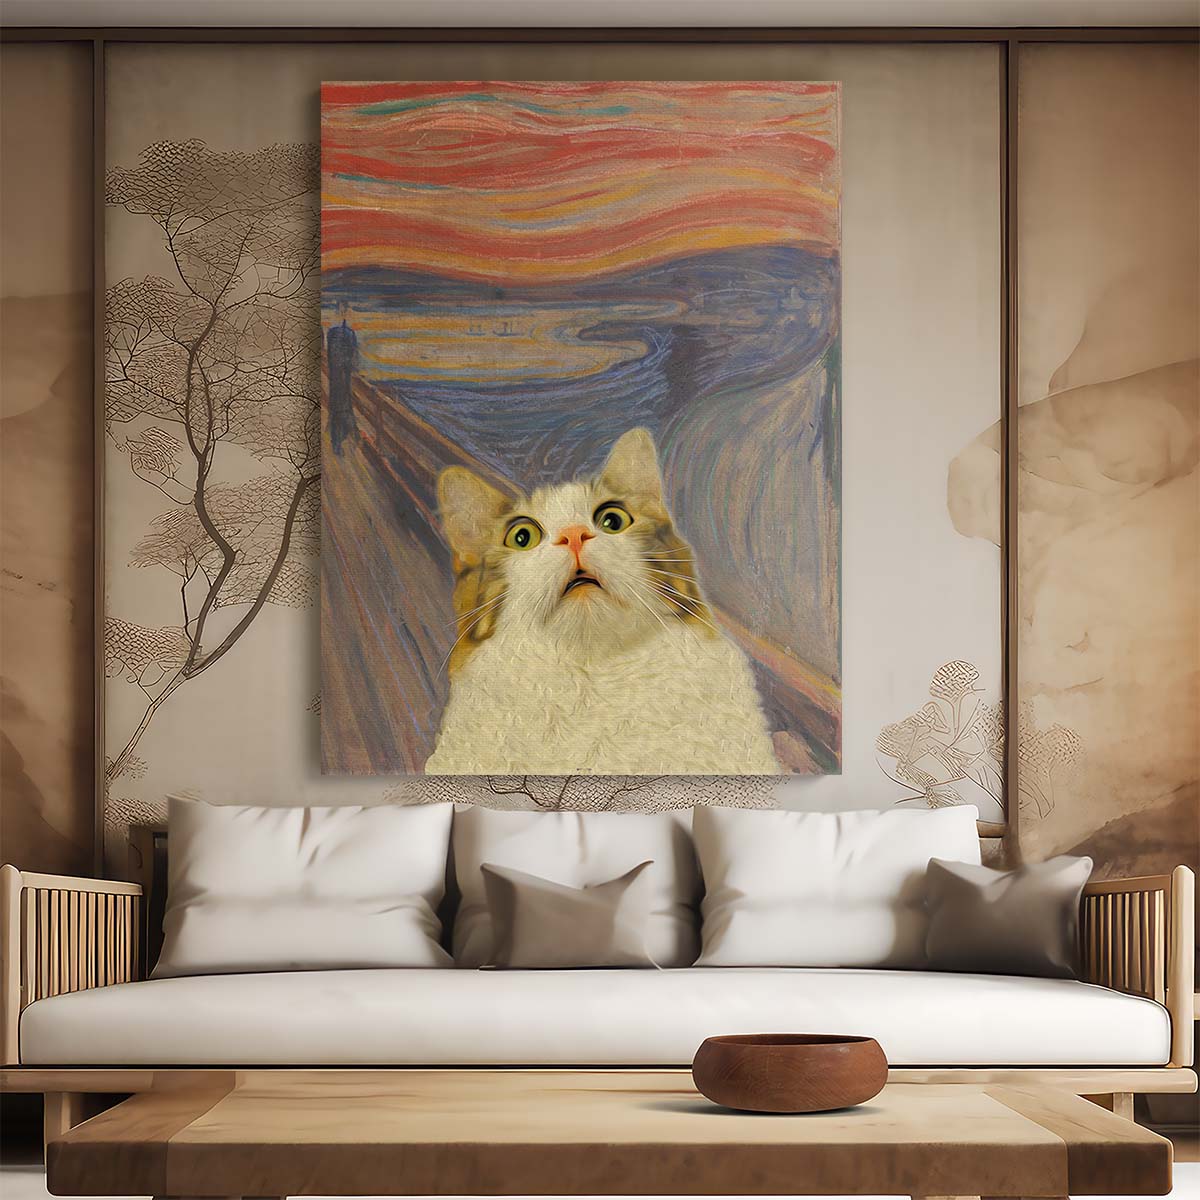 Funny Cat Scream Illustration, Memes-Inspired, Animal Portrait Wall Art by Luxuriance Designs, made in USA